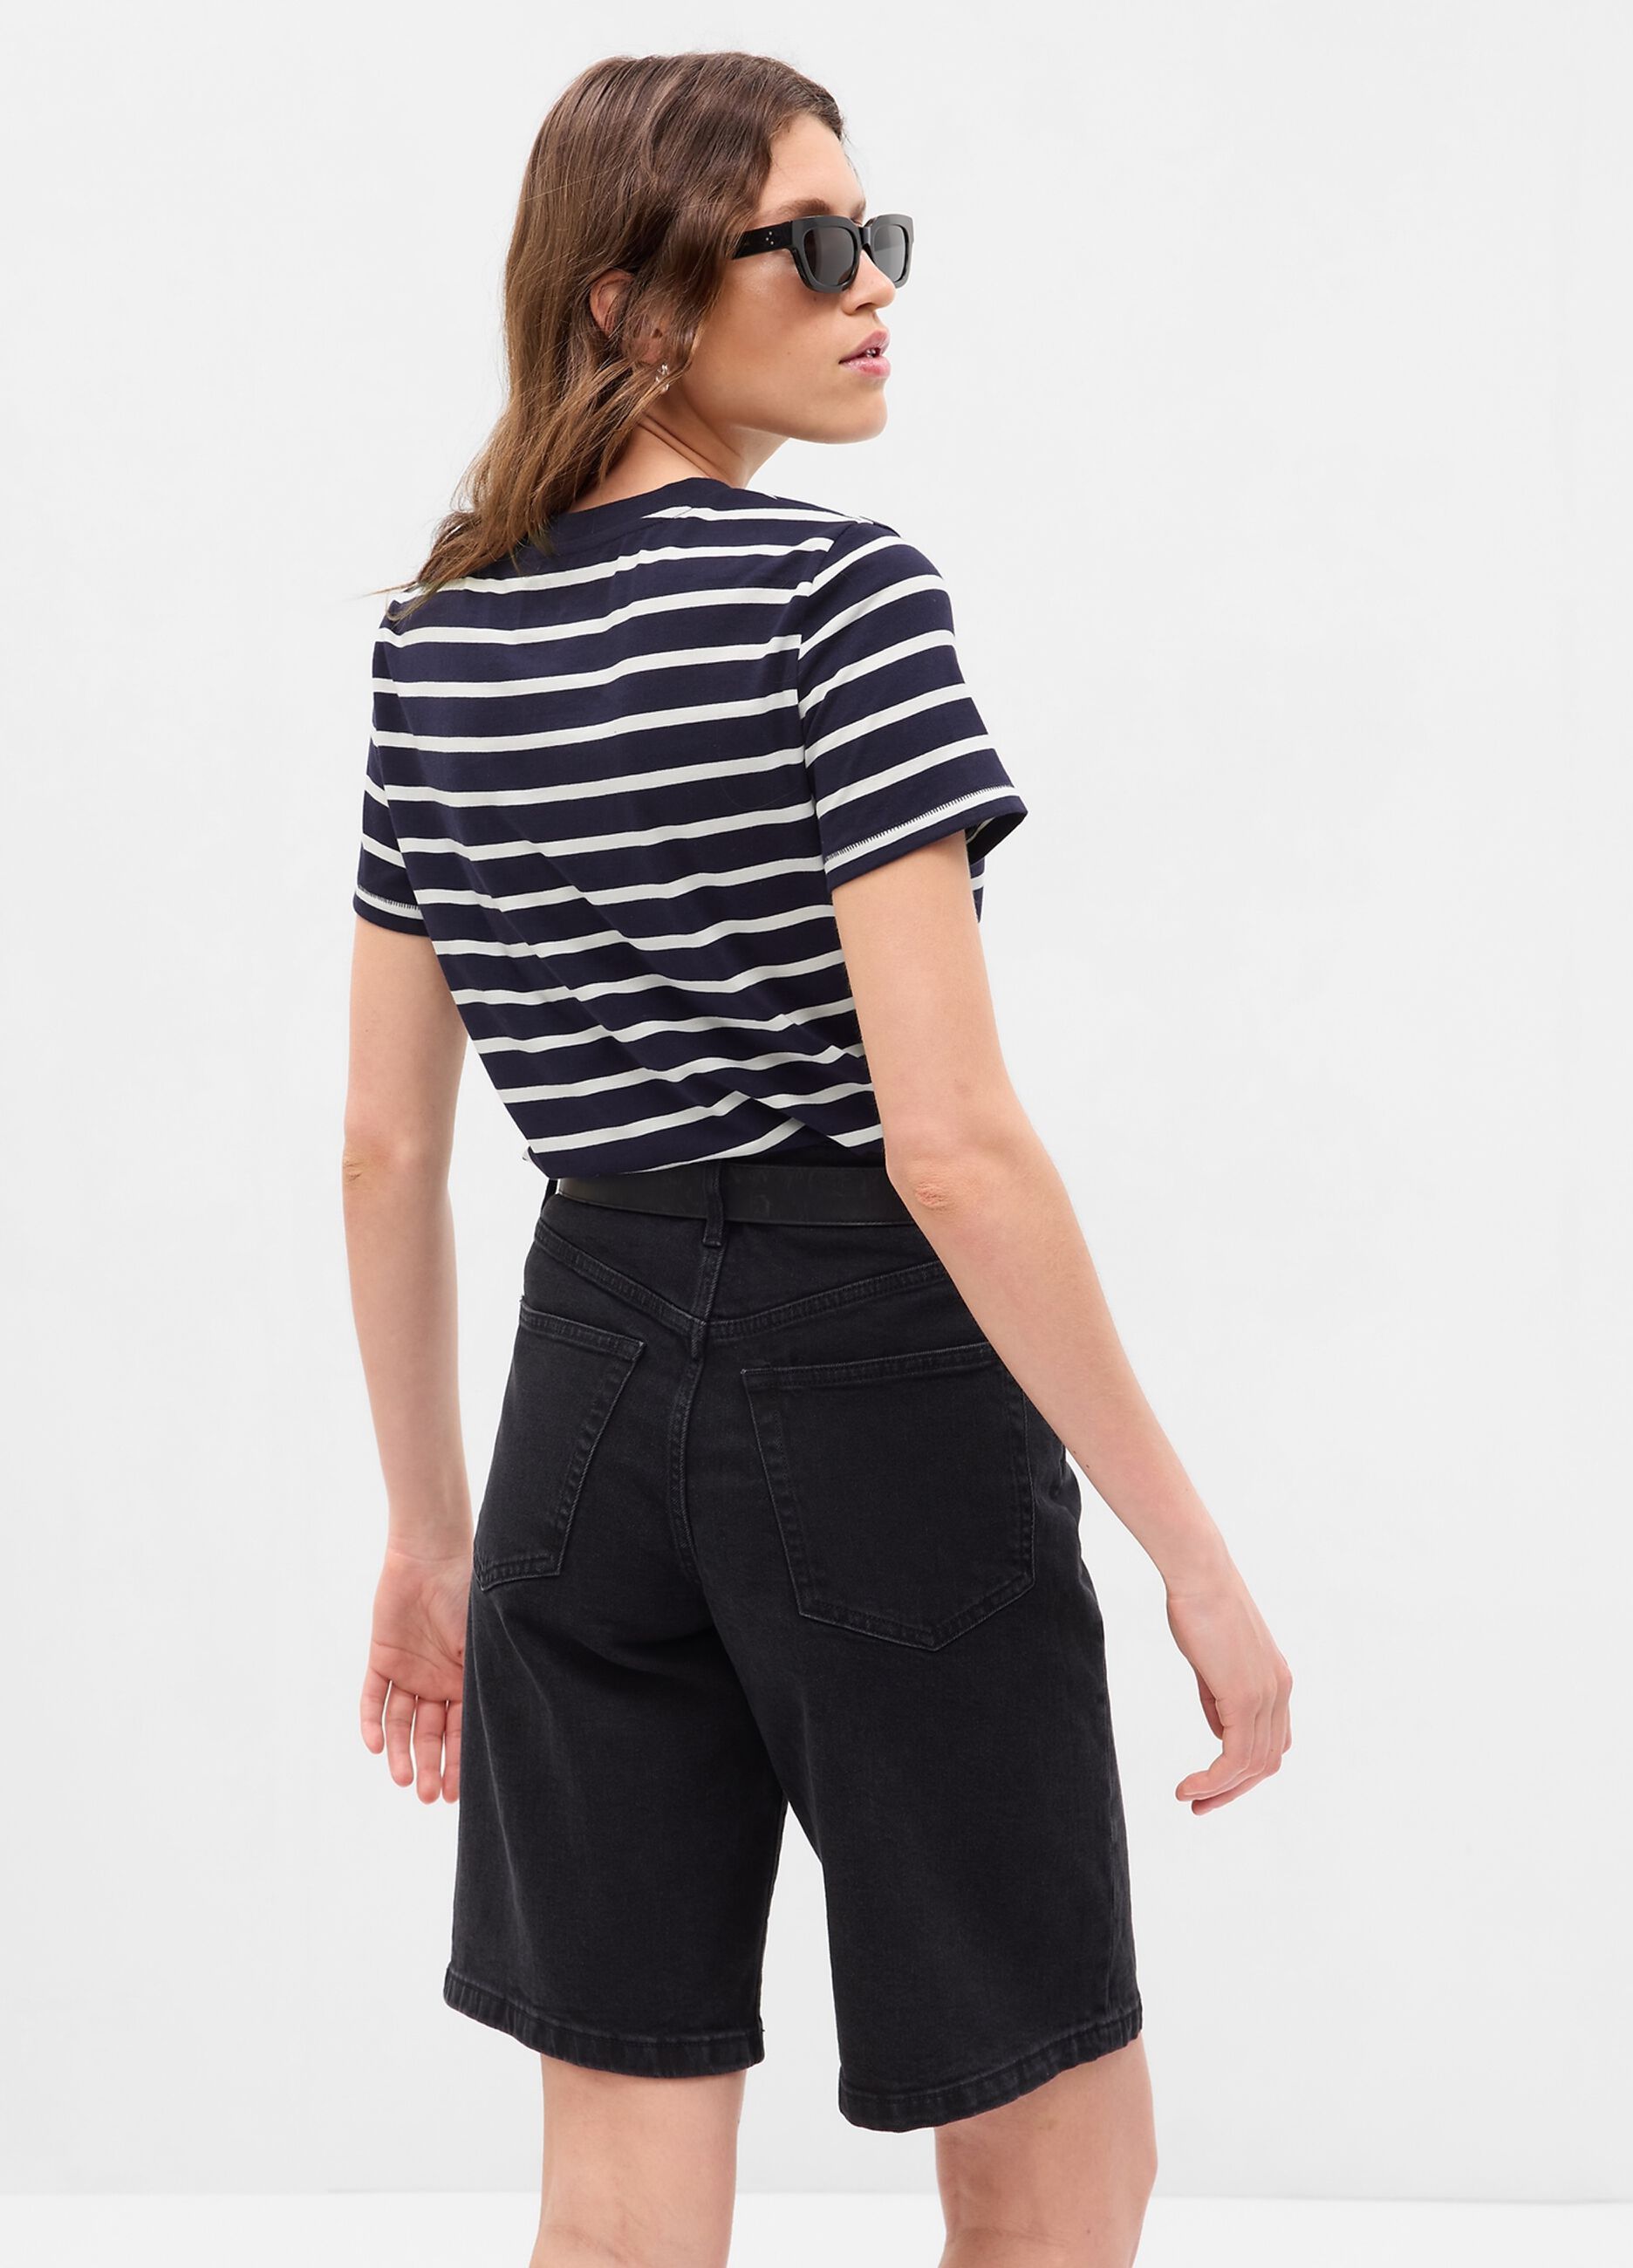 Organic cotton T-shirt with stripes